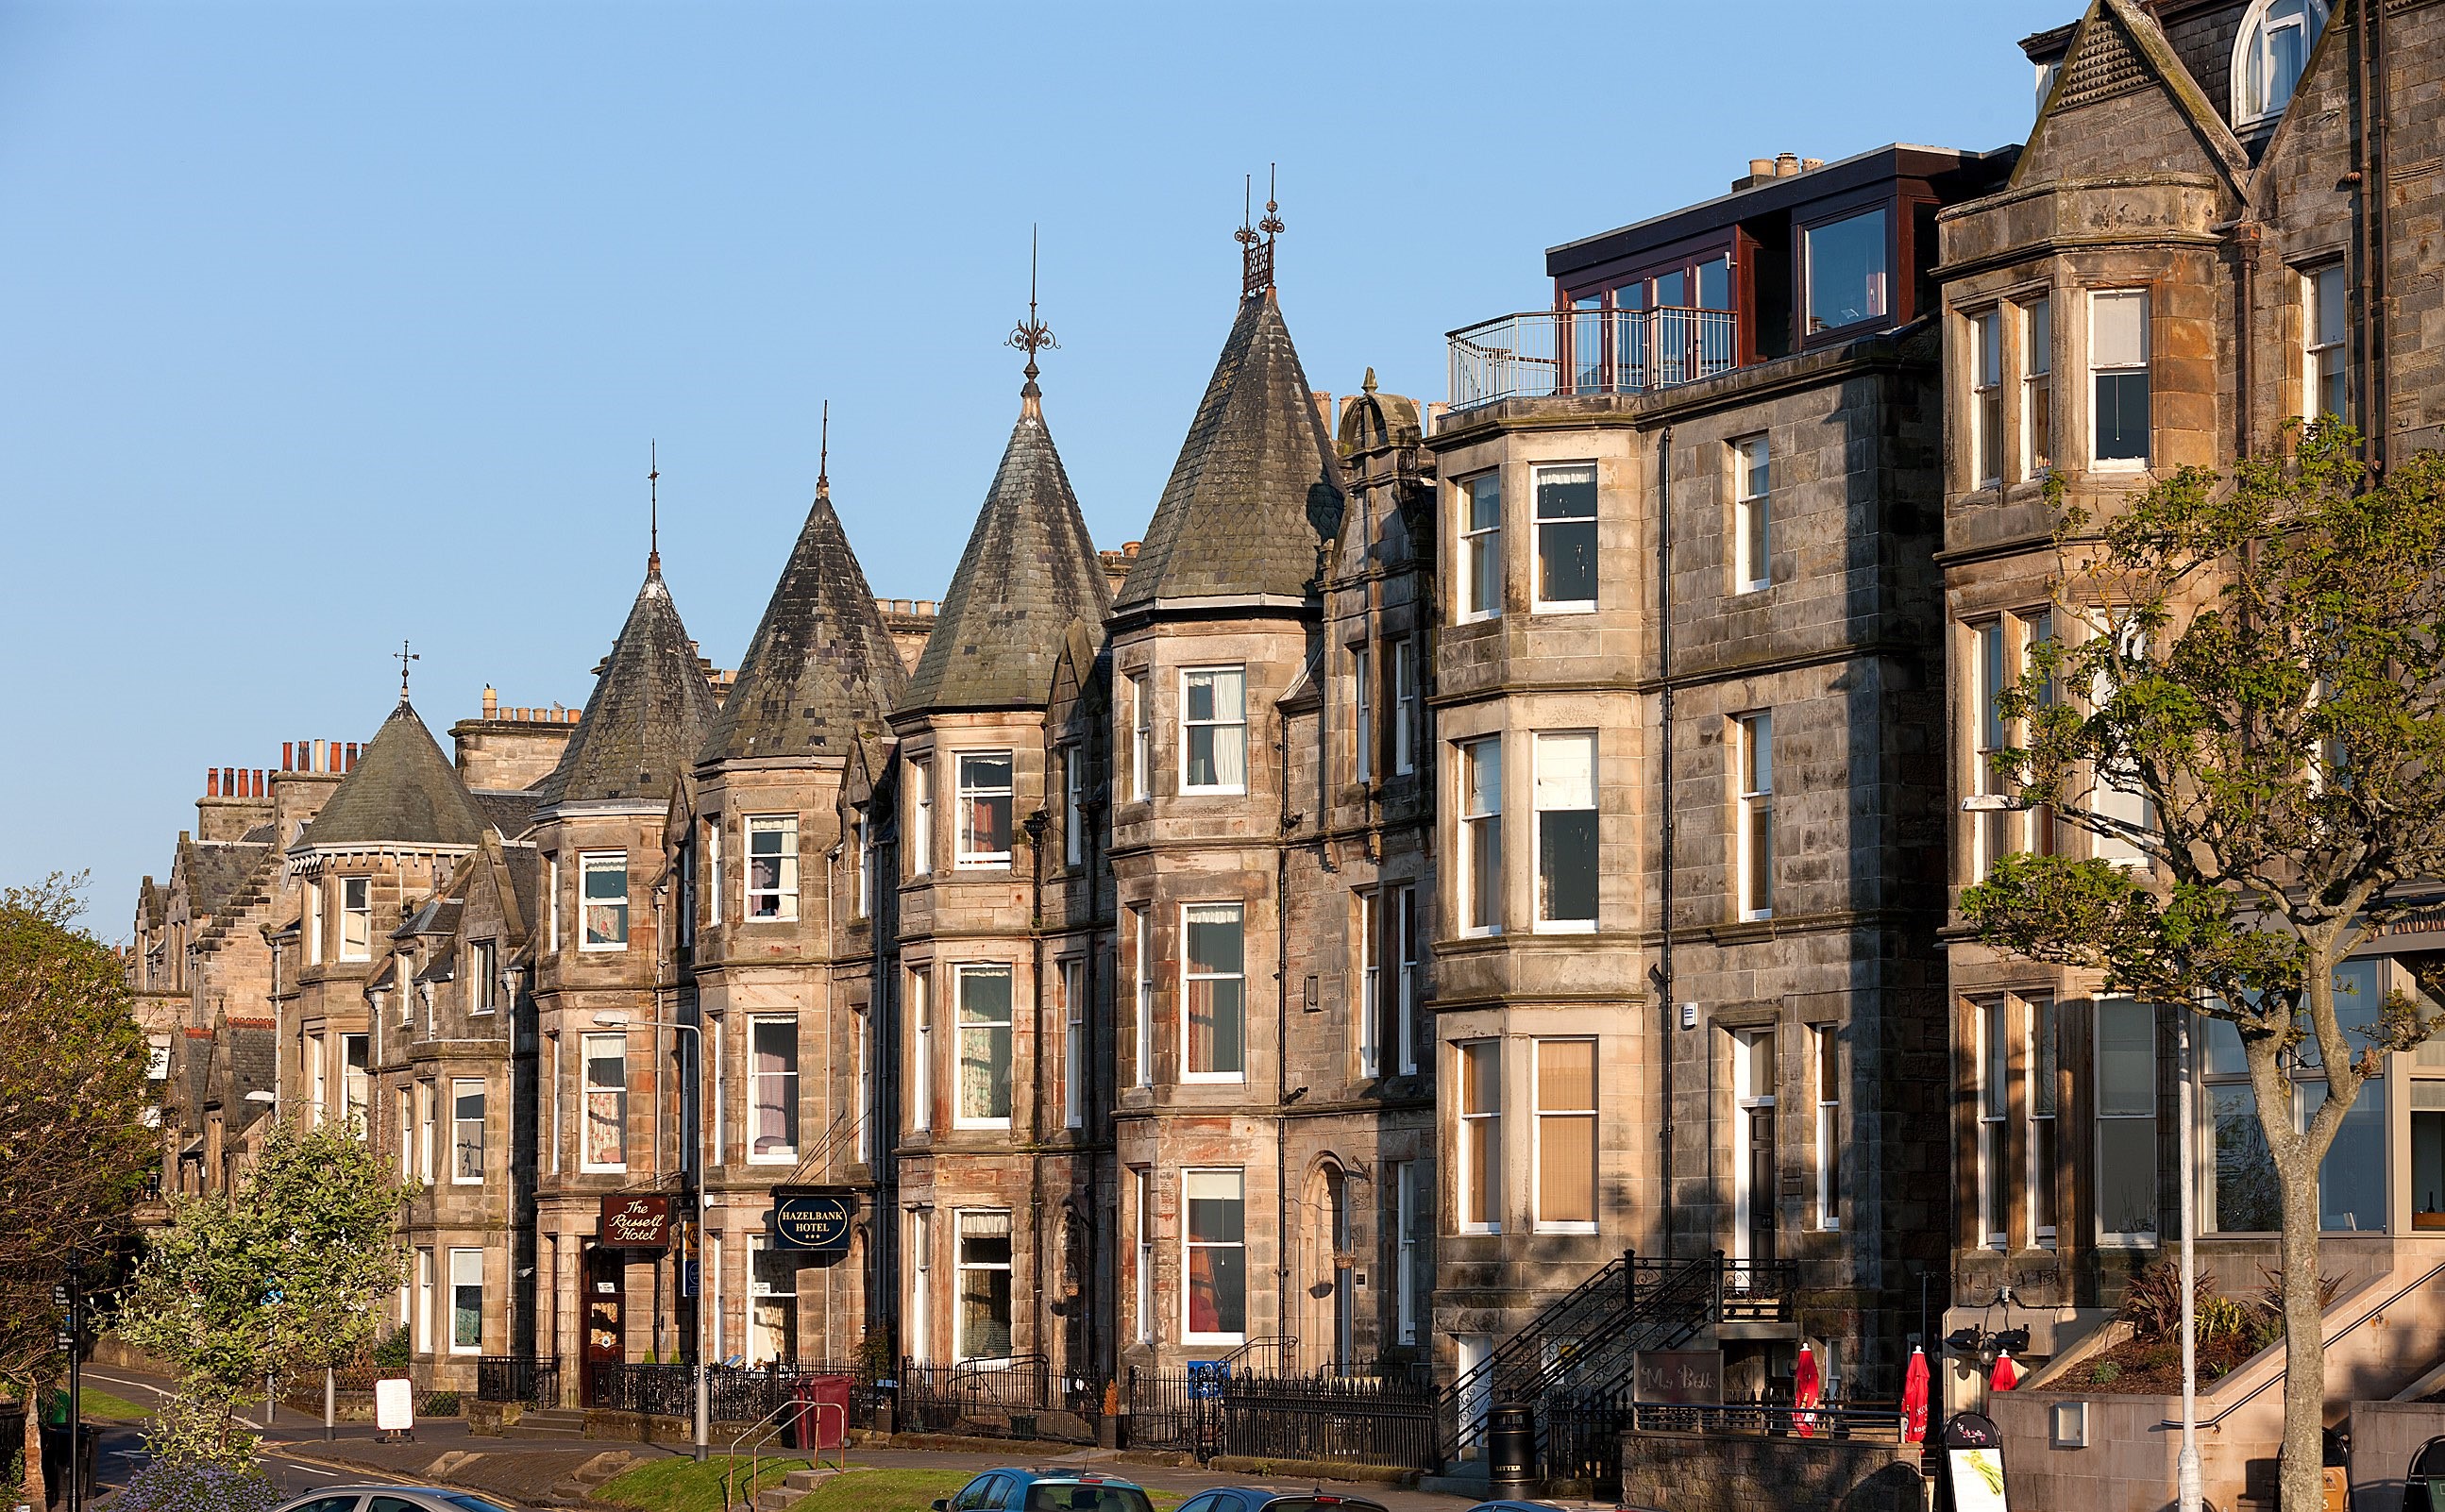 The Scores in St Andrews is one of Scotland's most expensive streets, with an average price of over £1 million